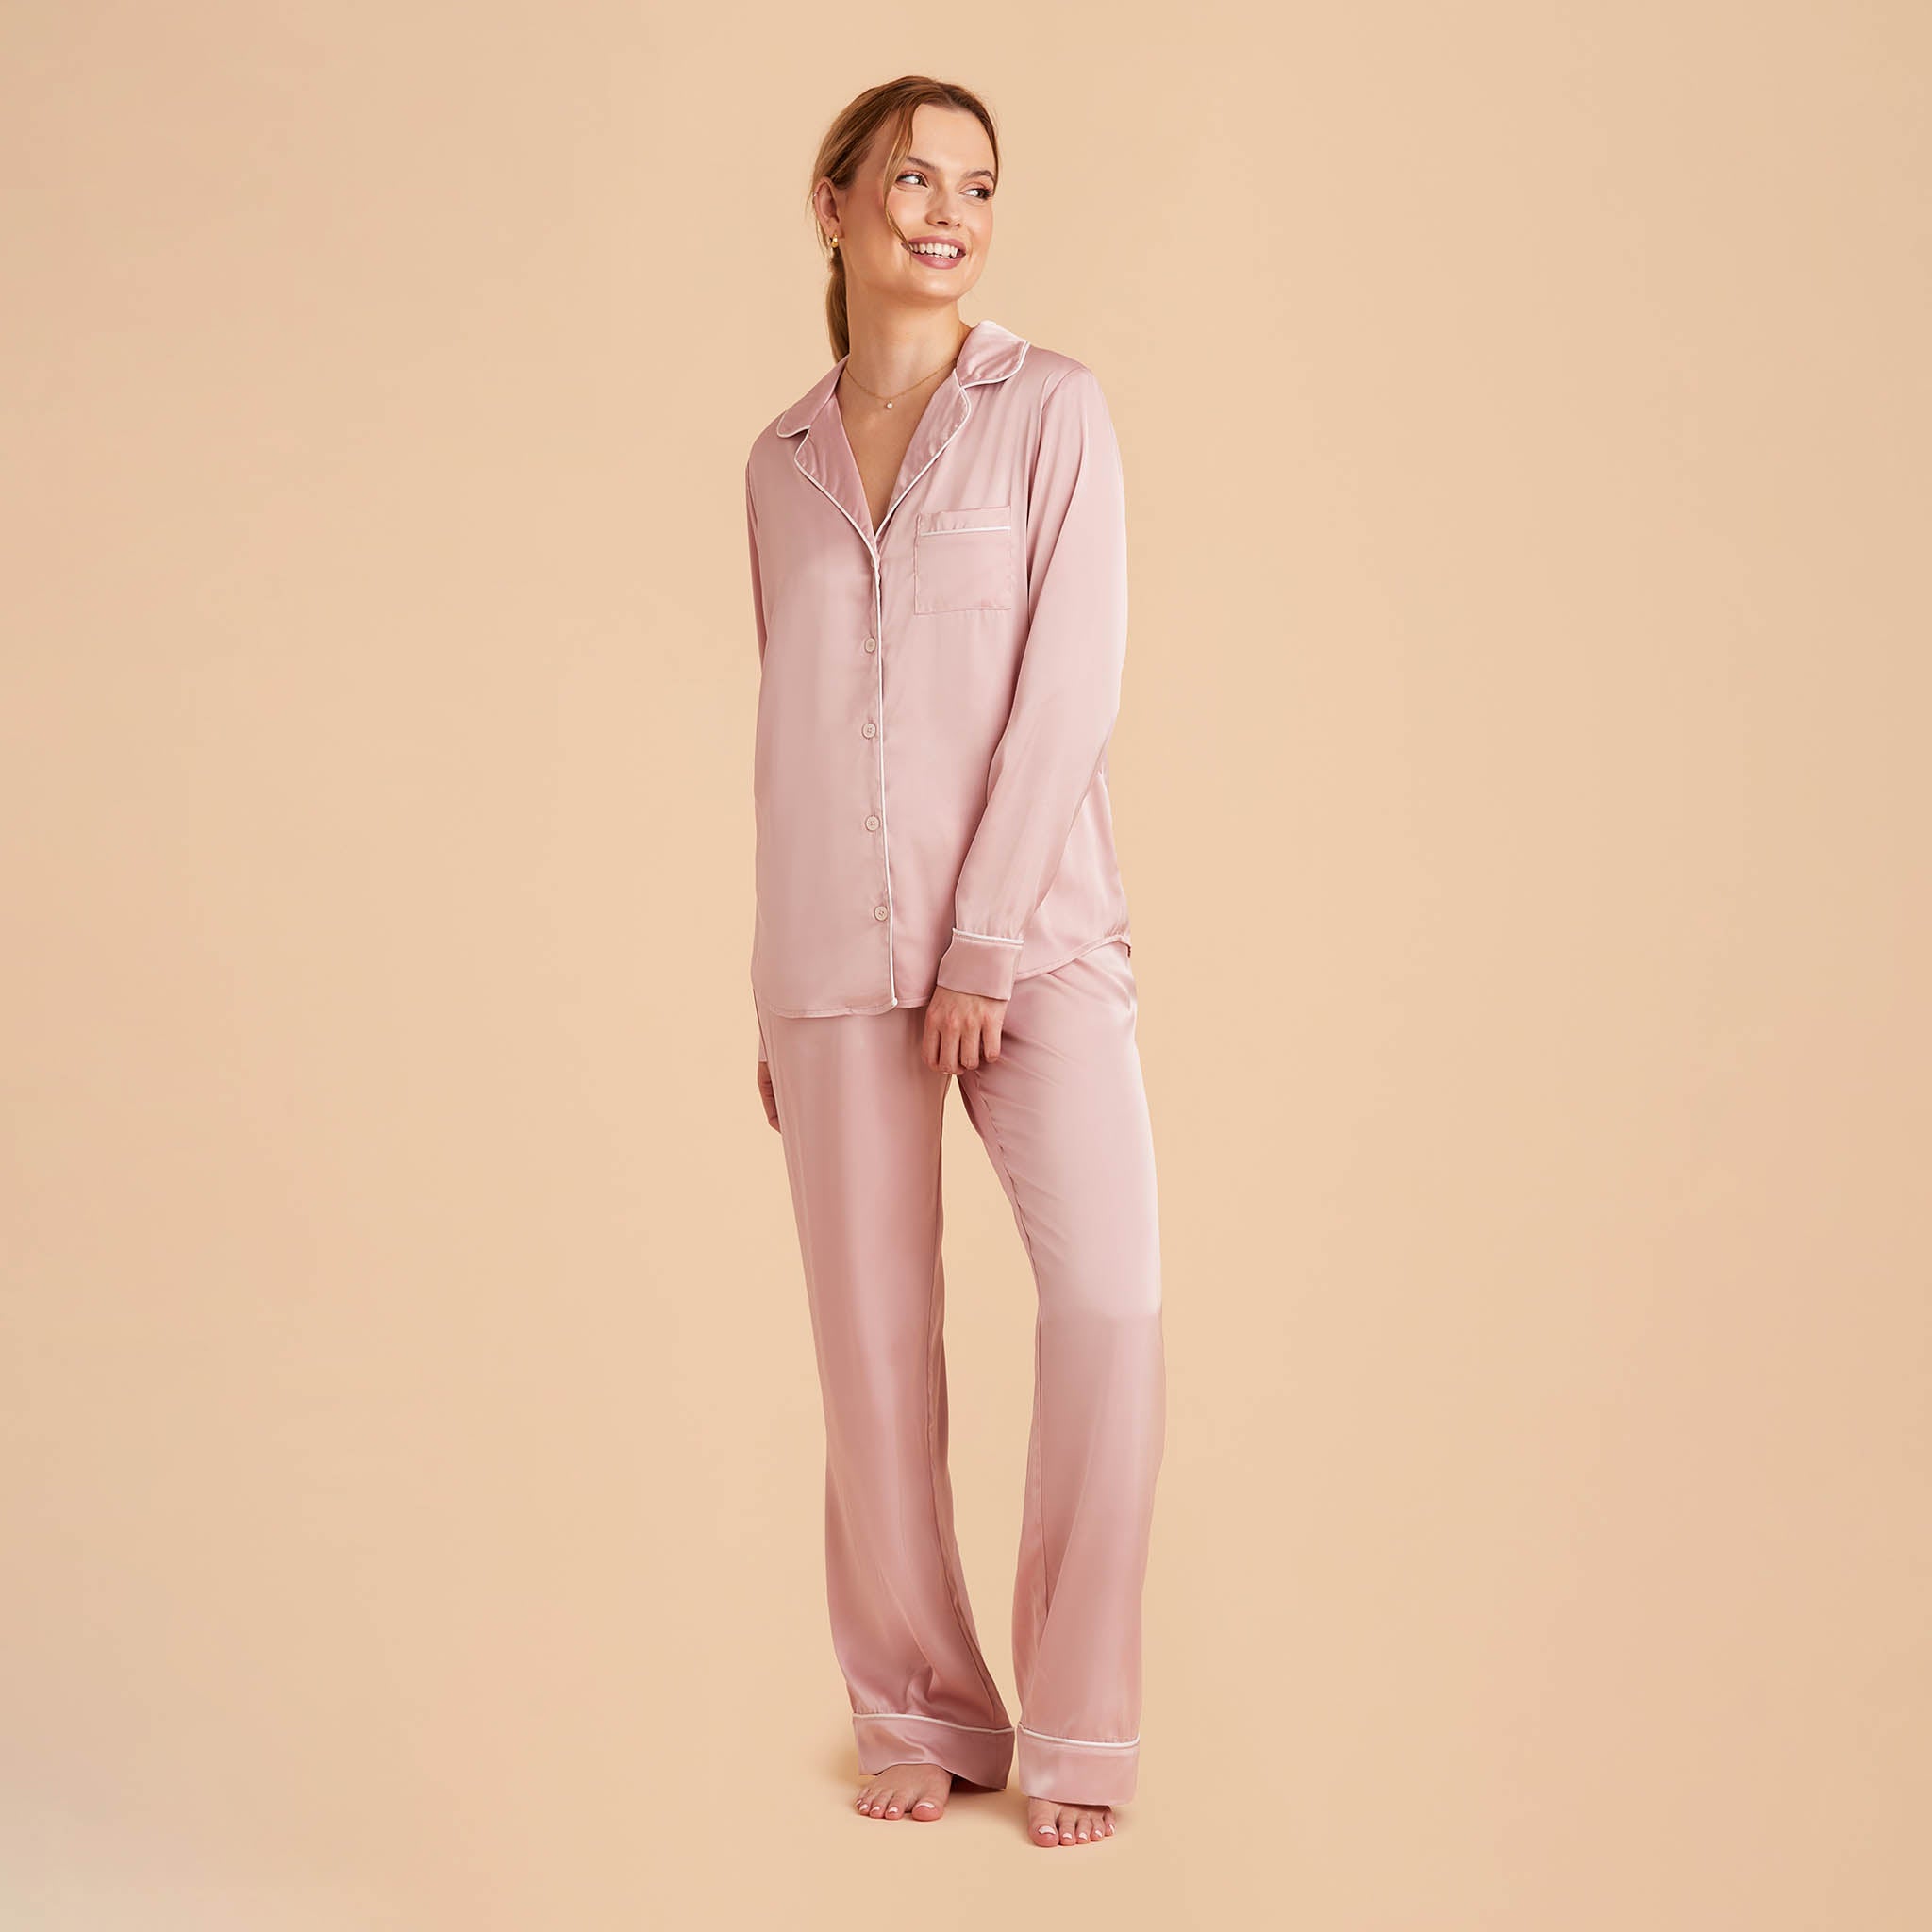 Jonny Satin Pants Bridesmaid Pajamas With White Piping in dusty pink, front view